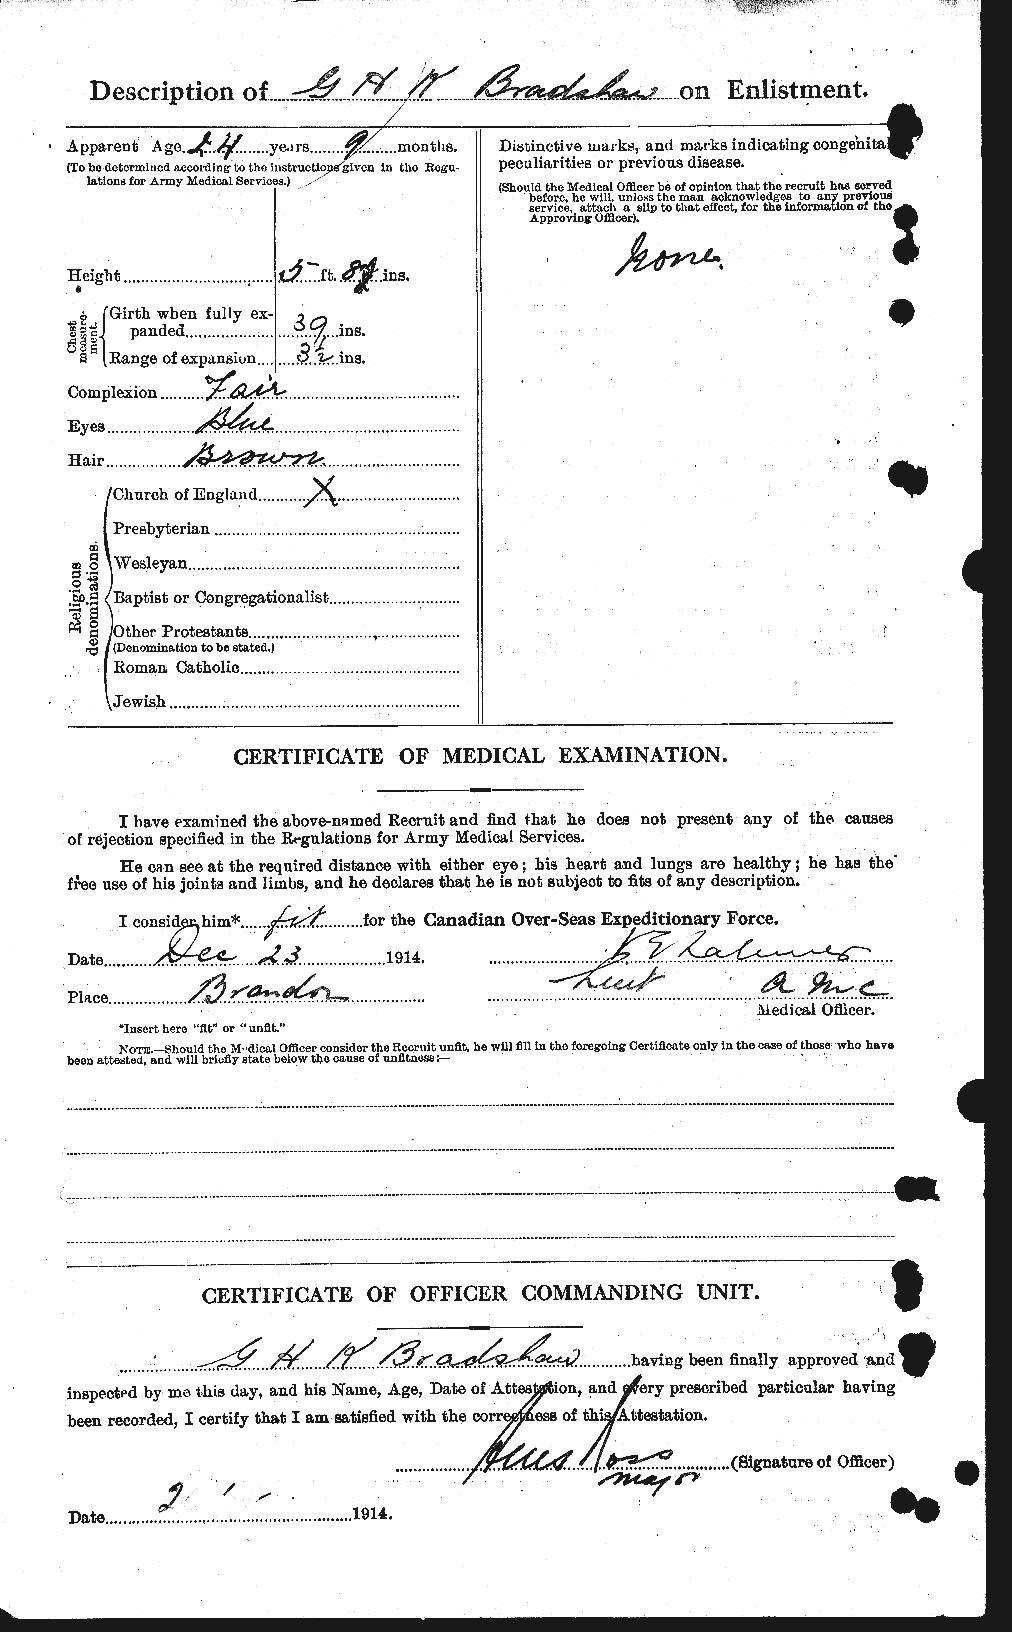 Personnel Records of the First World War - CEF 256626b